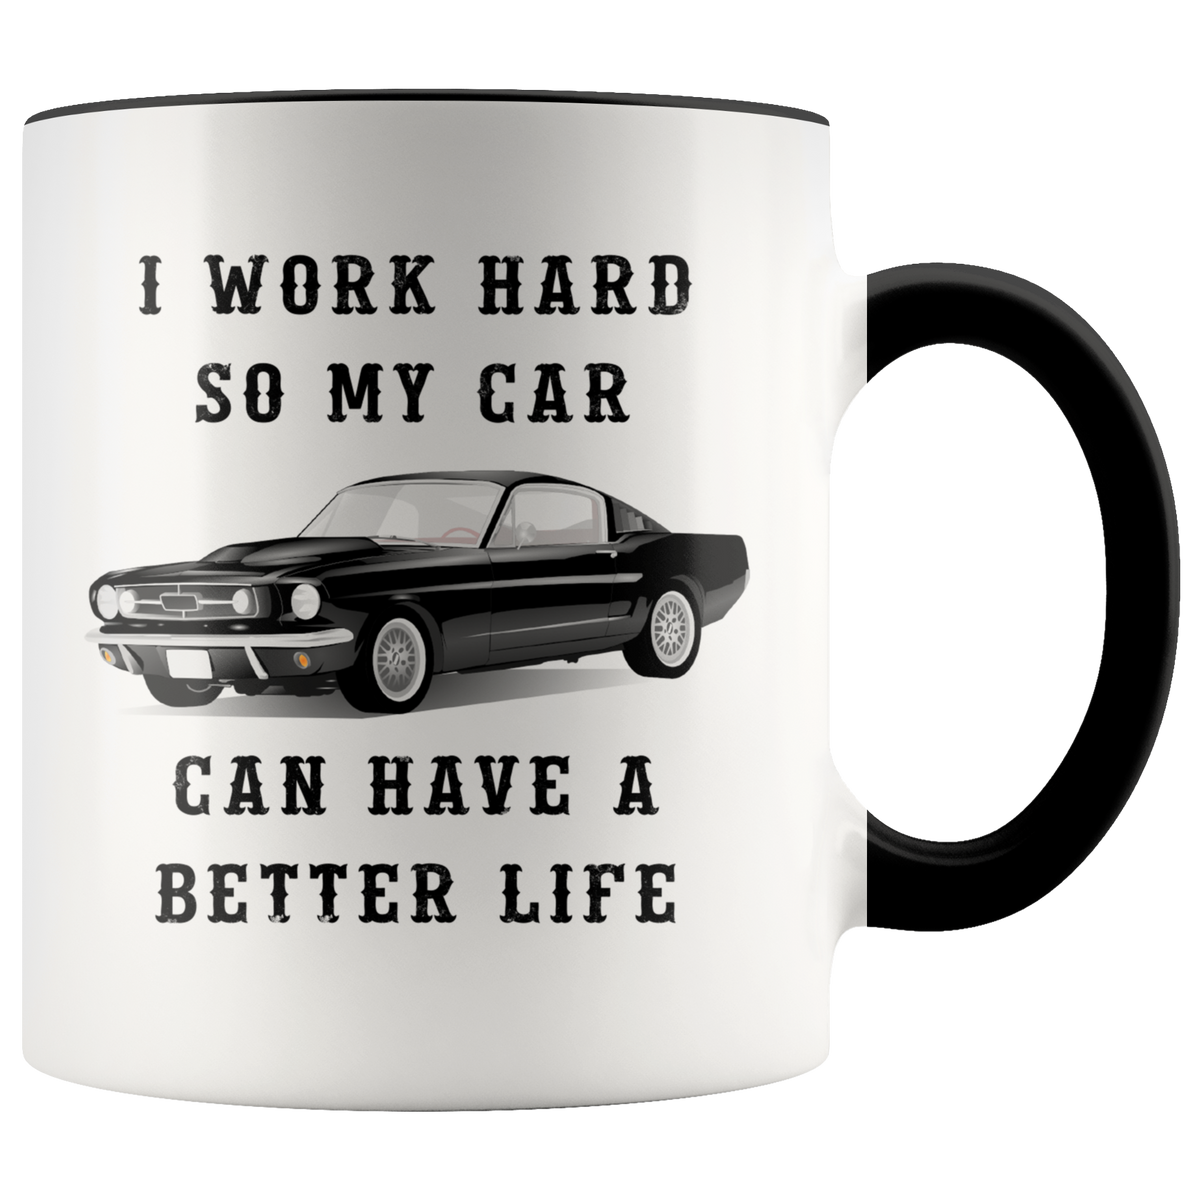 Funny Mug Gift For Car Enthusiasts Mechanic - I Work Hard So My Car Can Have A Better Life Accent Mug 11oz (black)